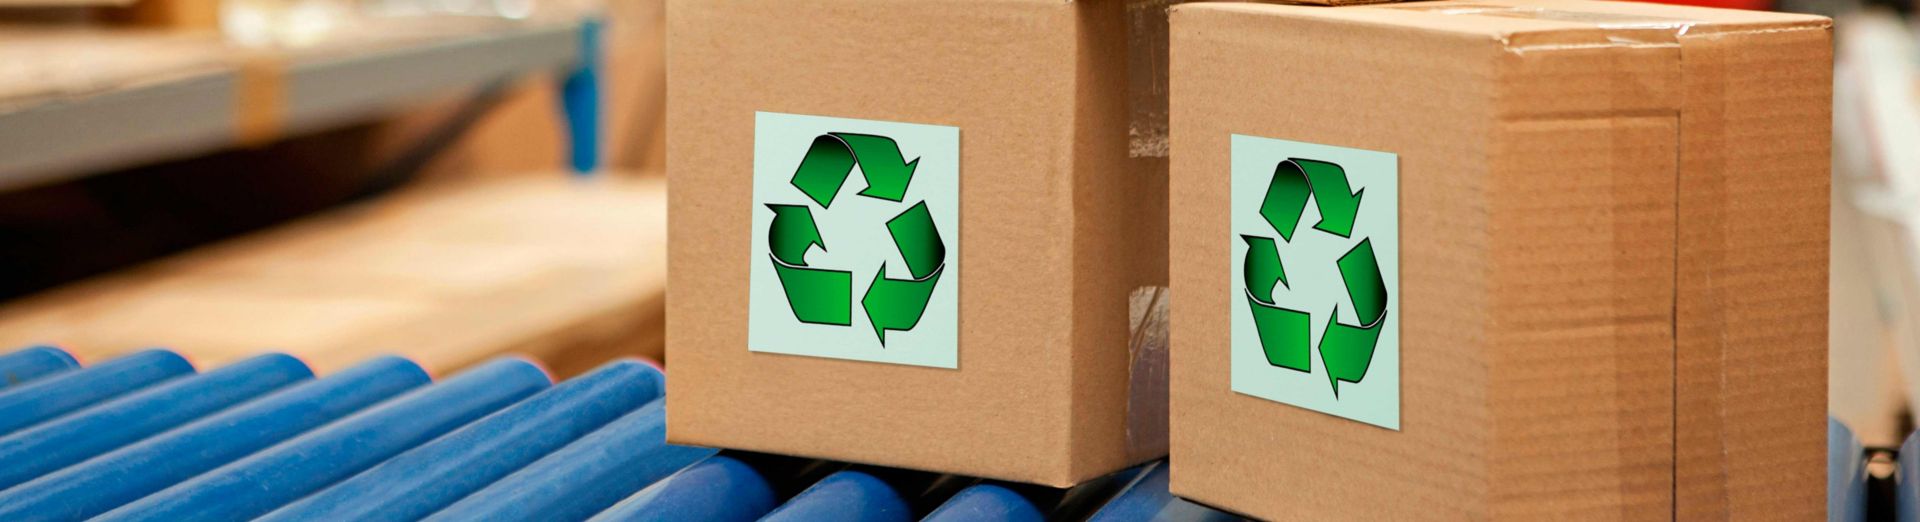 Sustainable logistics, Cardboard boxes with recycling symbols on conveyor belt